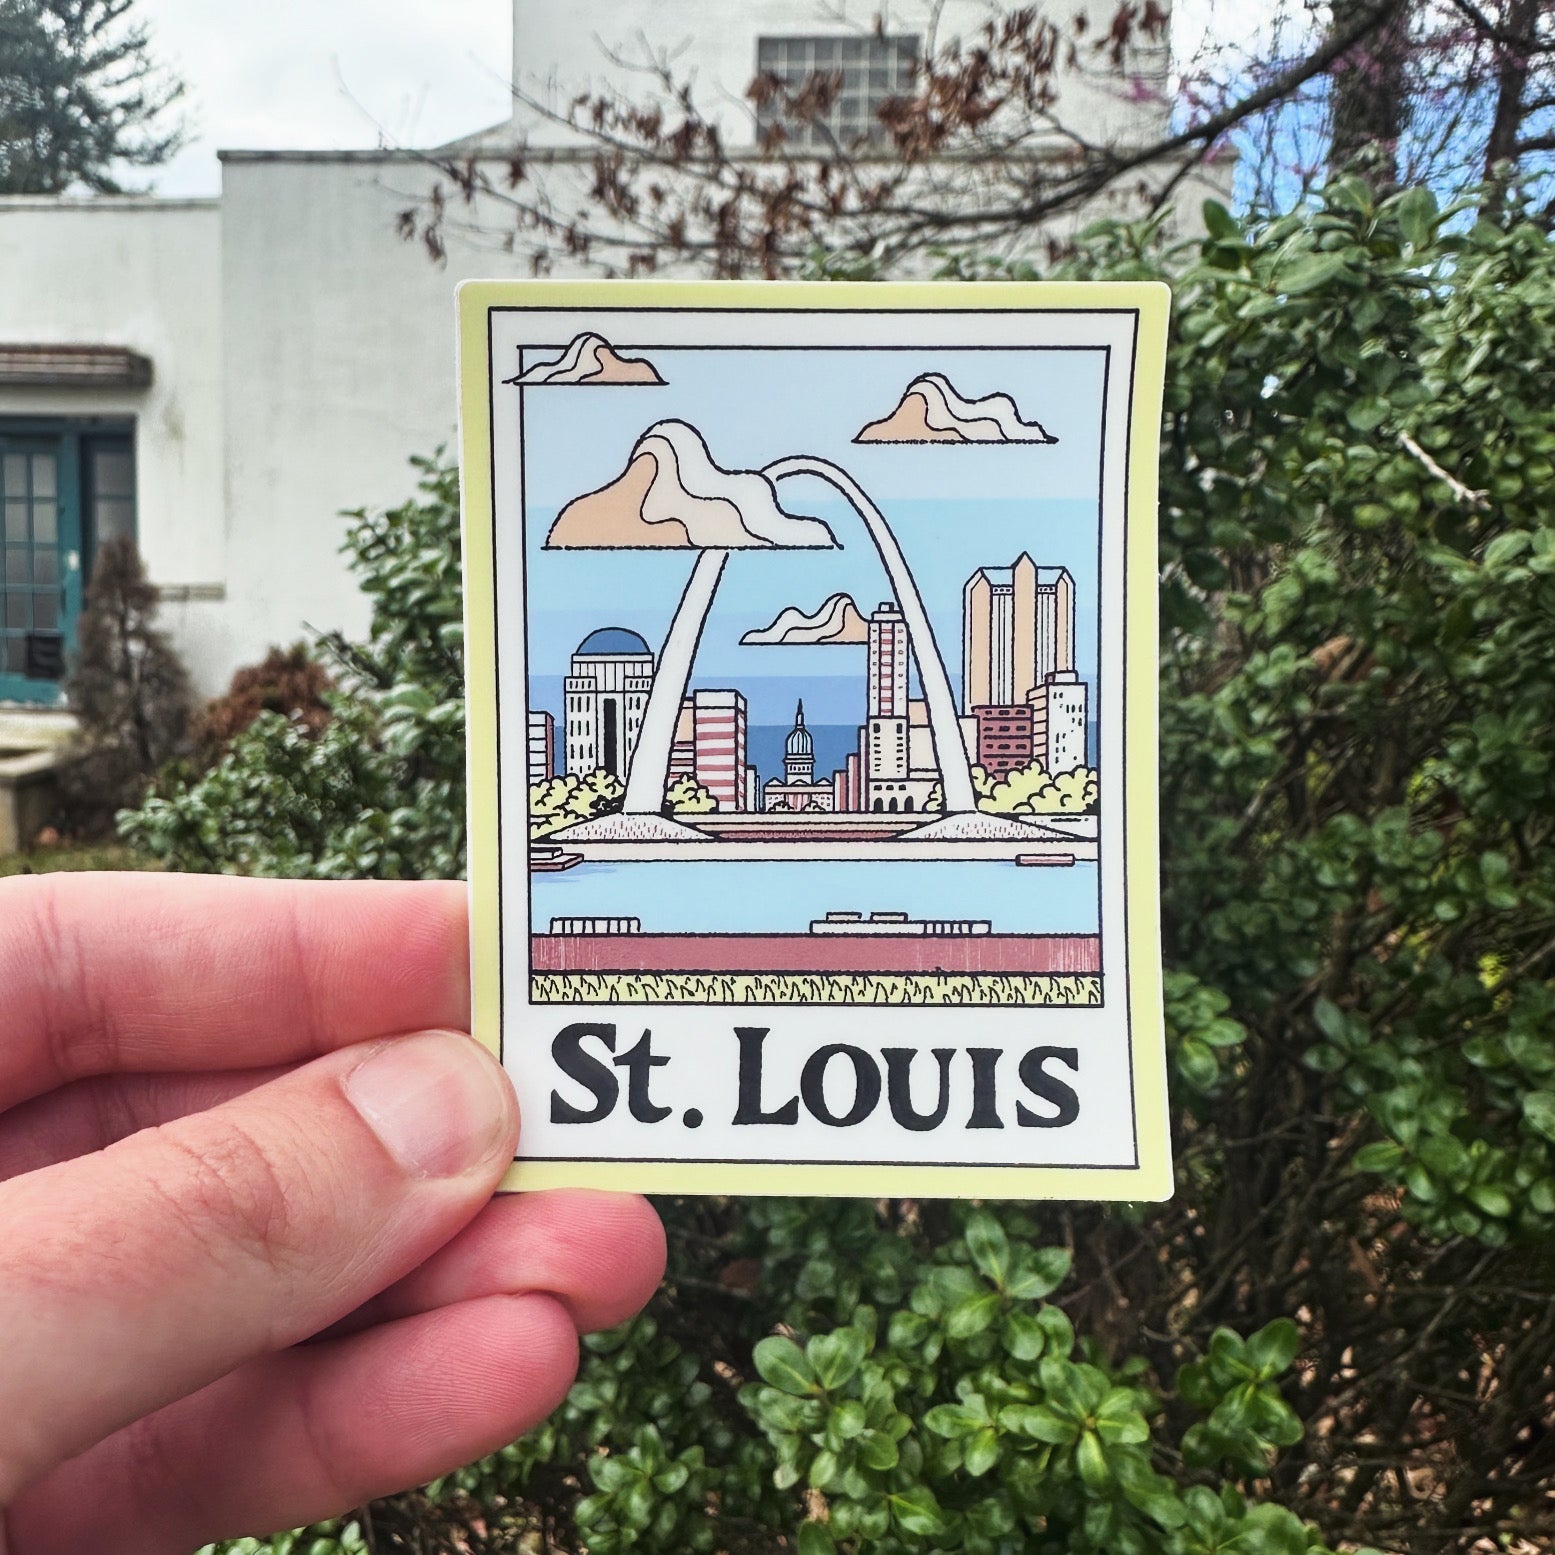 A St. Louis Picture - menottees